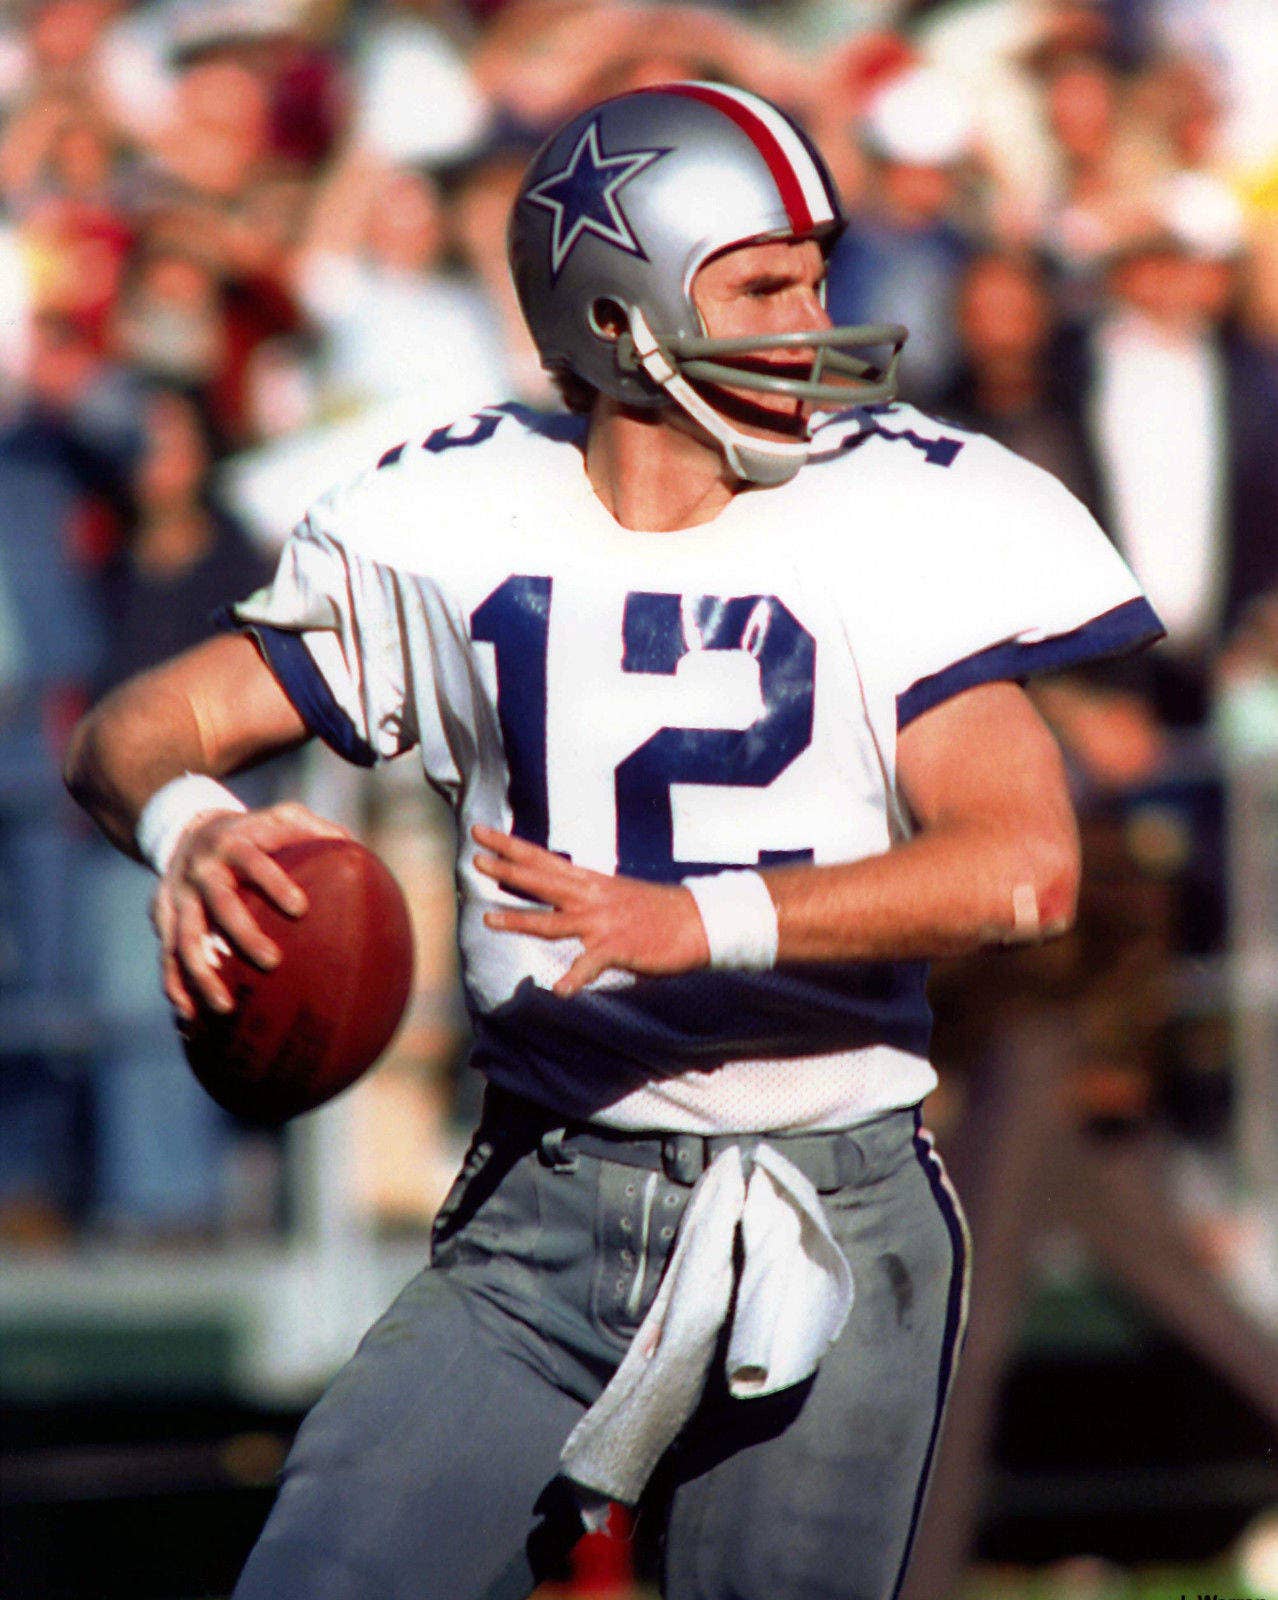 Dallas Cowboys Hall-of-Fame quarterback Roger Staubach, who threw 153 TDs in a career that began after service in the United States Navy. (Photo from Wikimedia Commons)